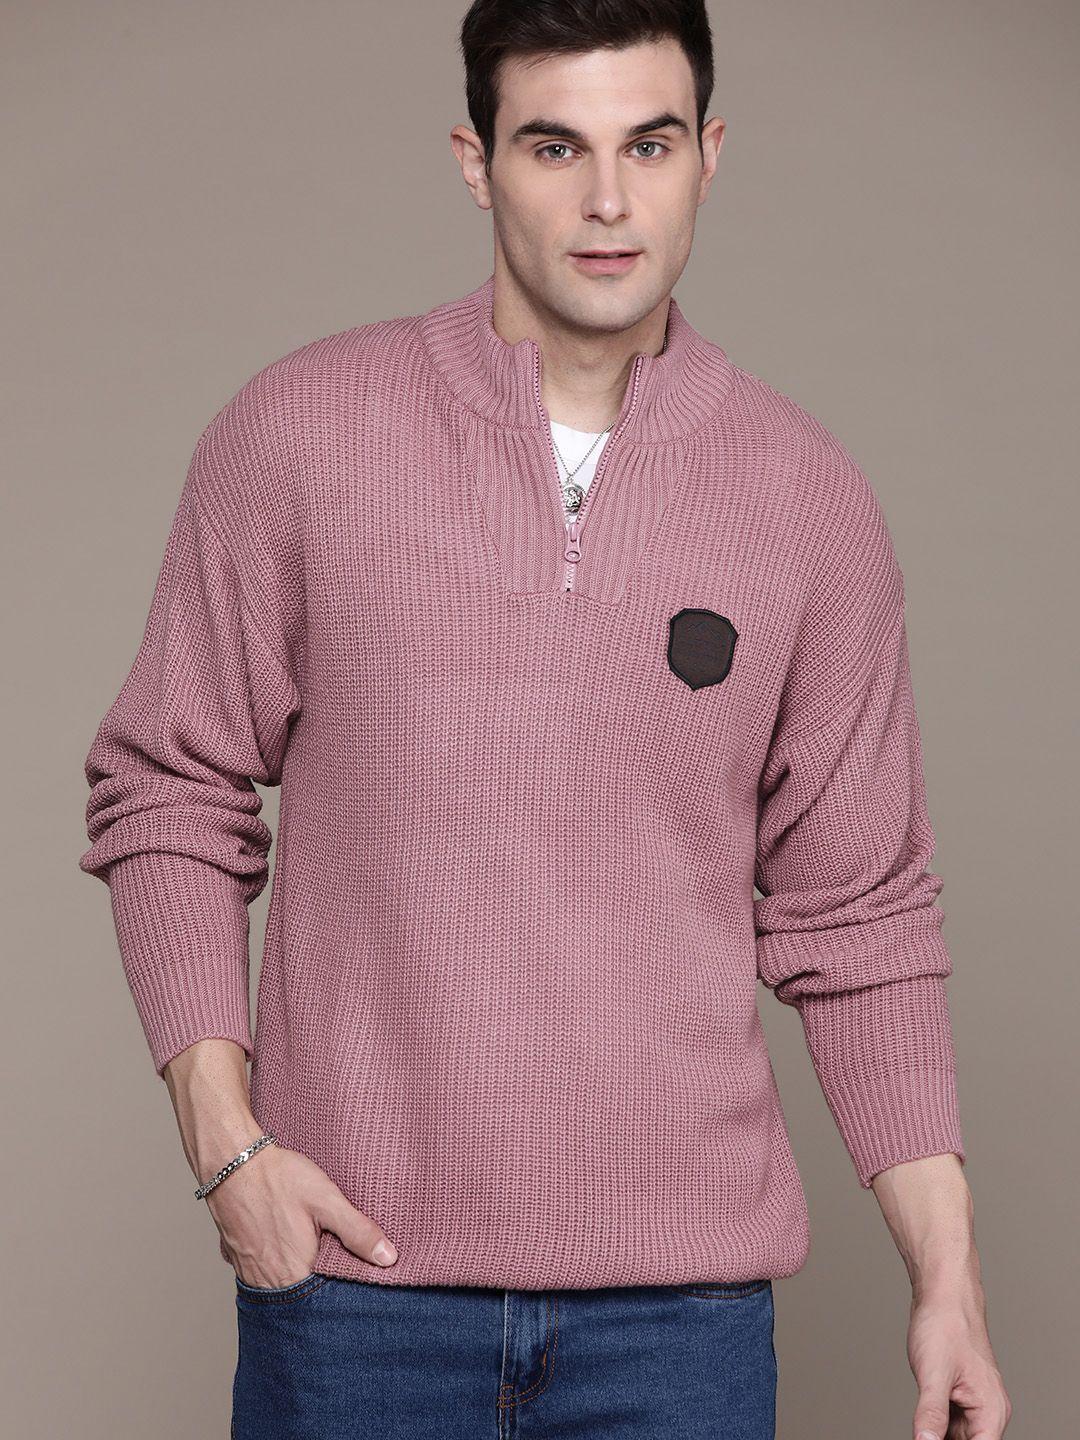 the roadster lifestyle co. mock collar half zipper pullover